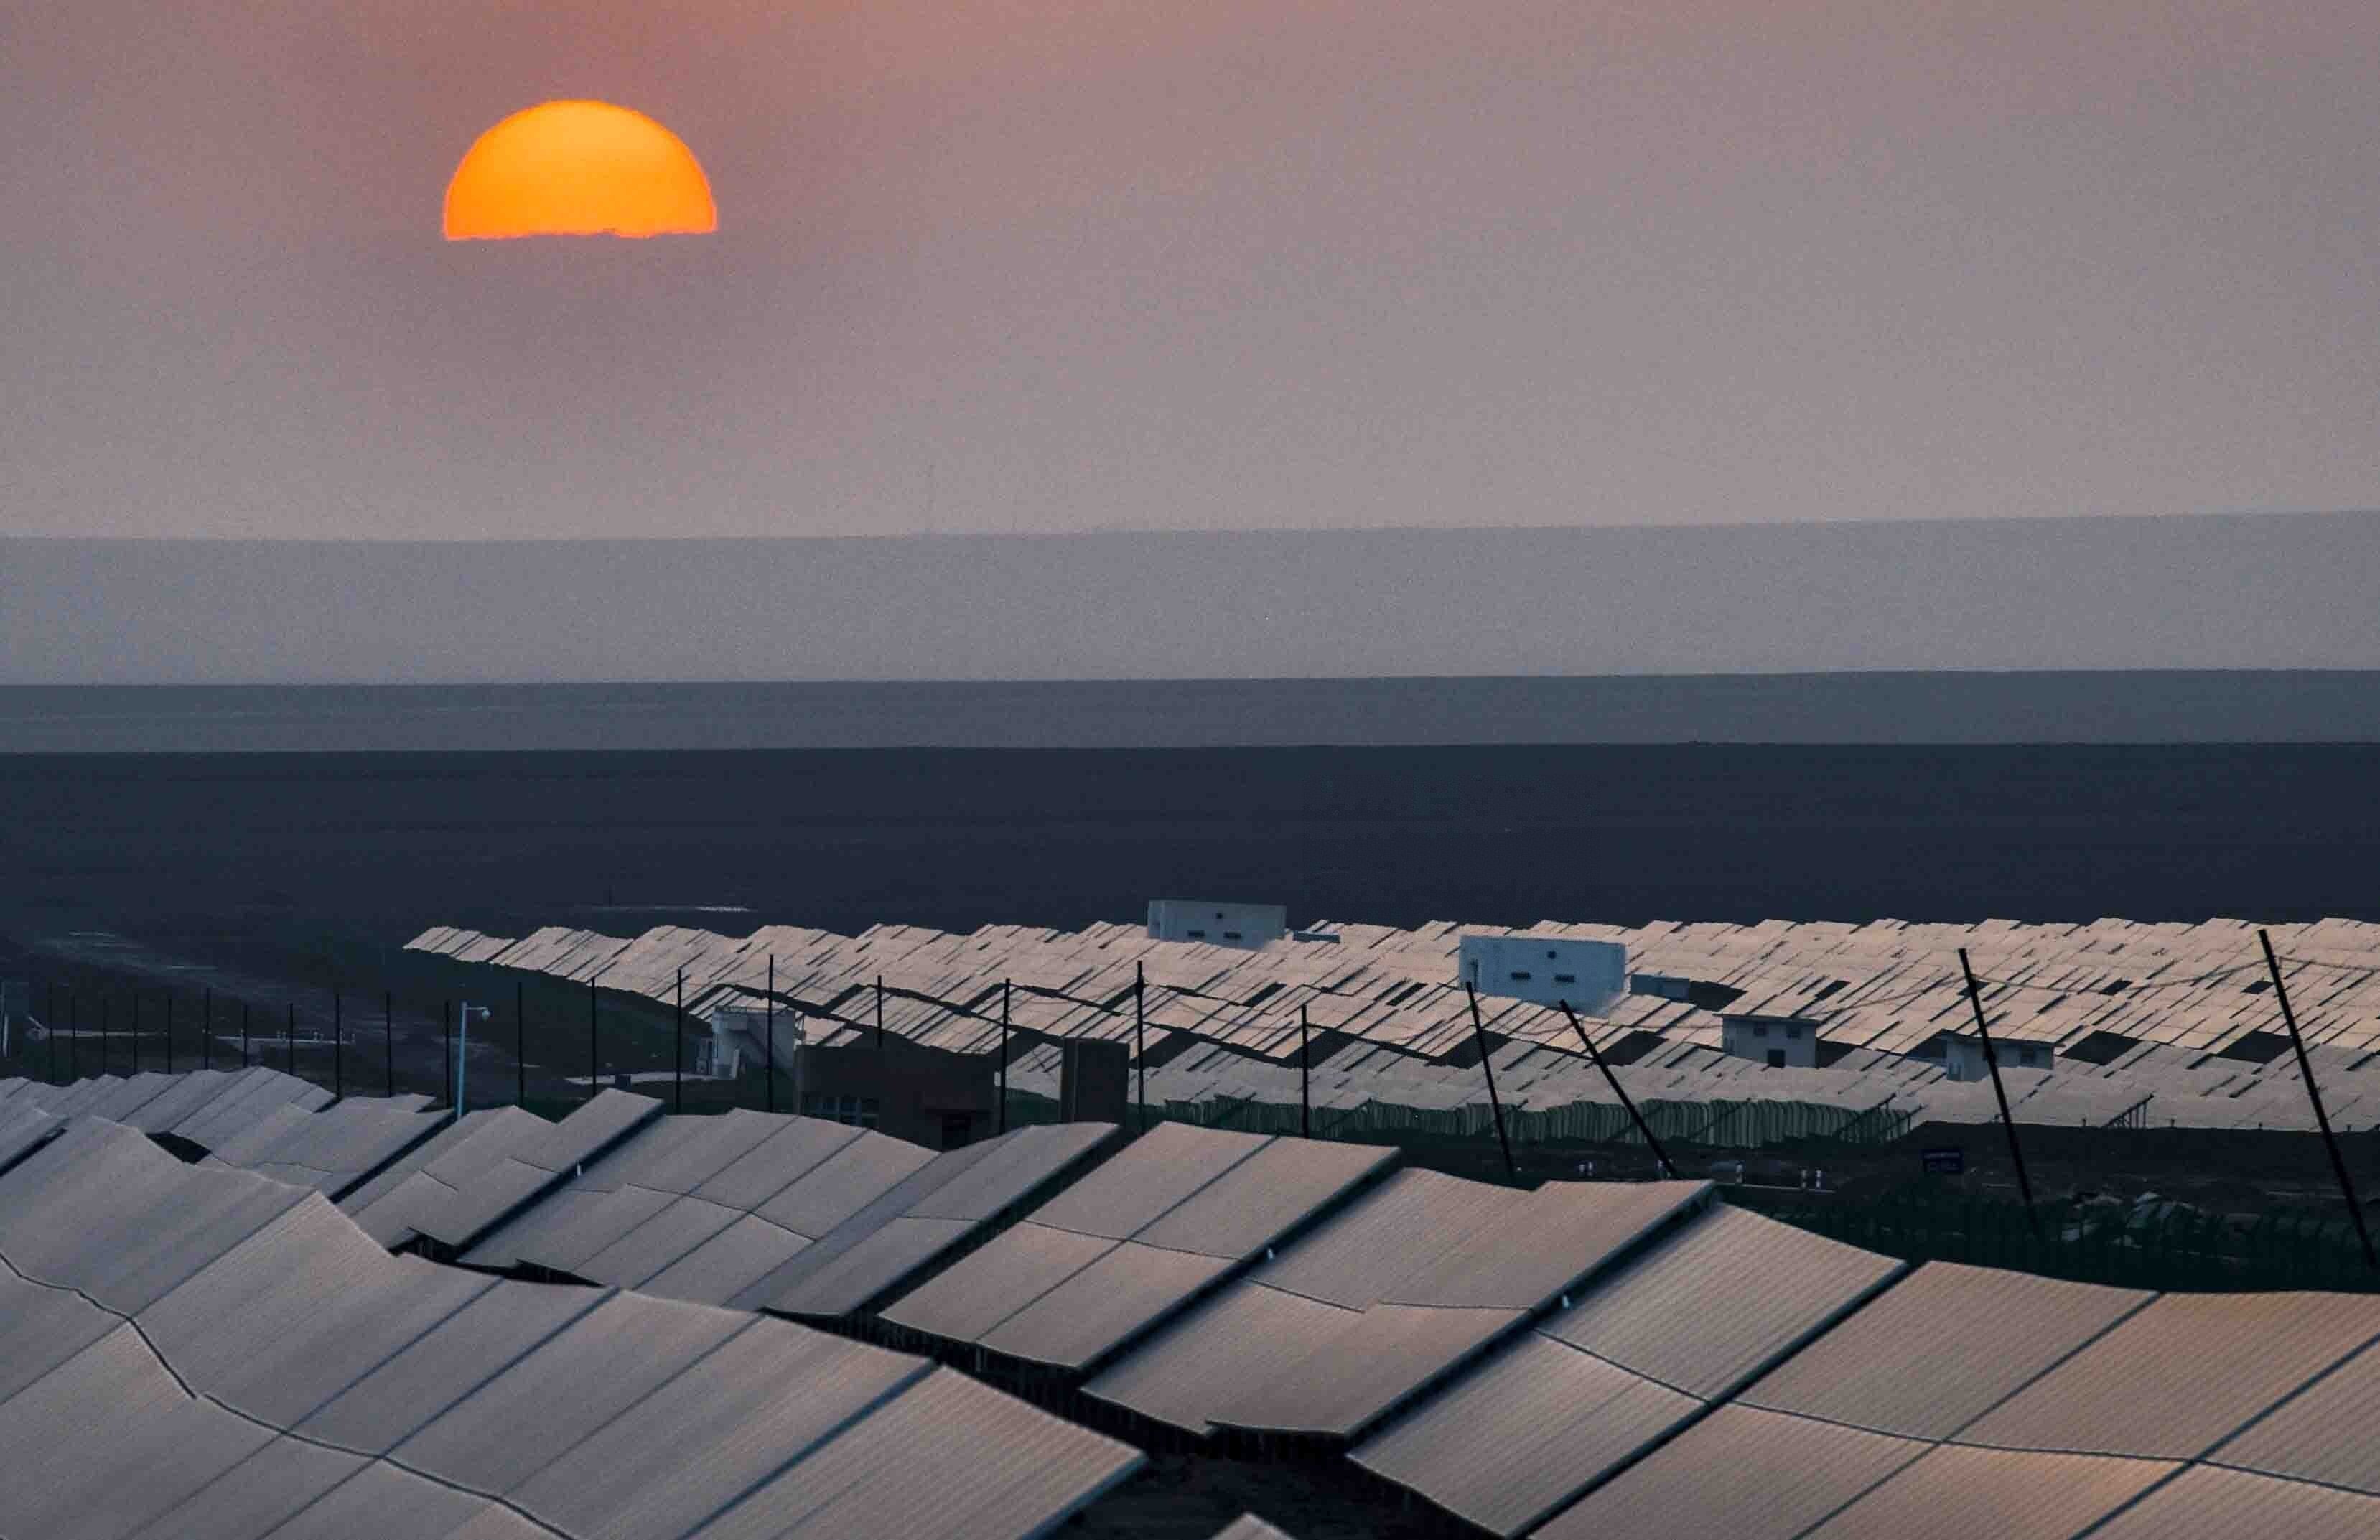 The sun sets over a photovoltaic power plant in Turpan in northwest China’s Xinjiang Uygur Autonomous Region in September 2018. China has been trying to ensure the solar power sector can survive without subsidies. Photo: Xinhua